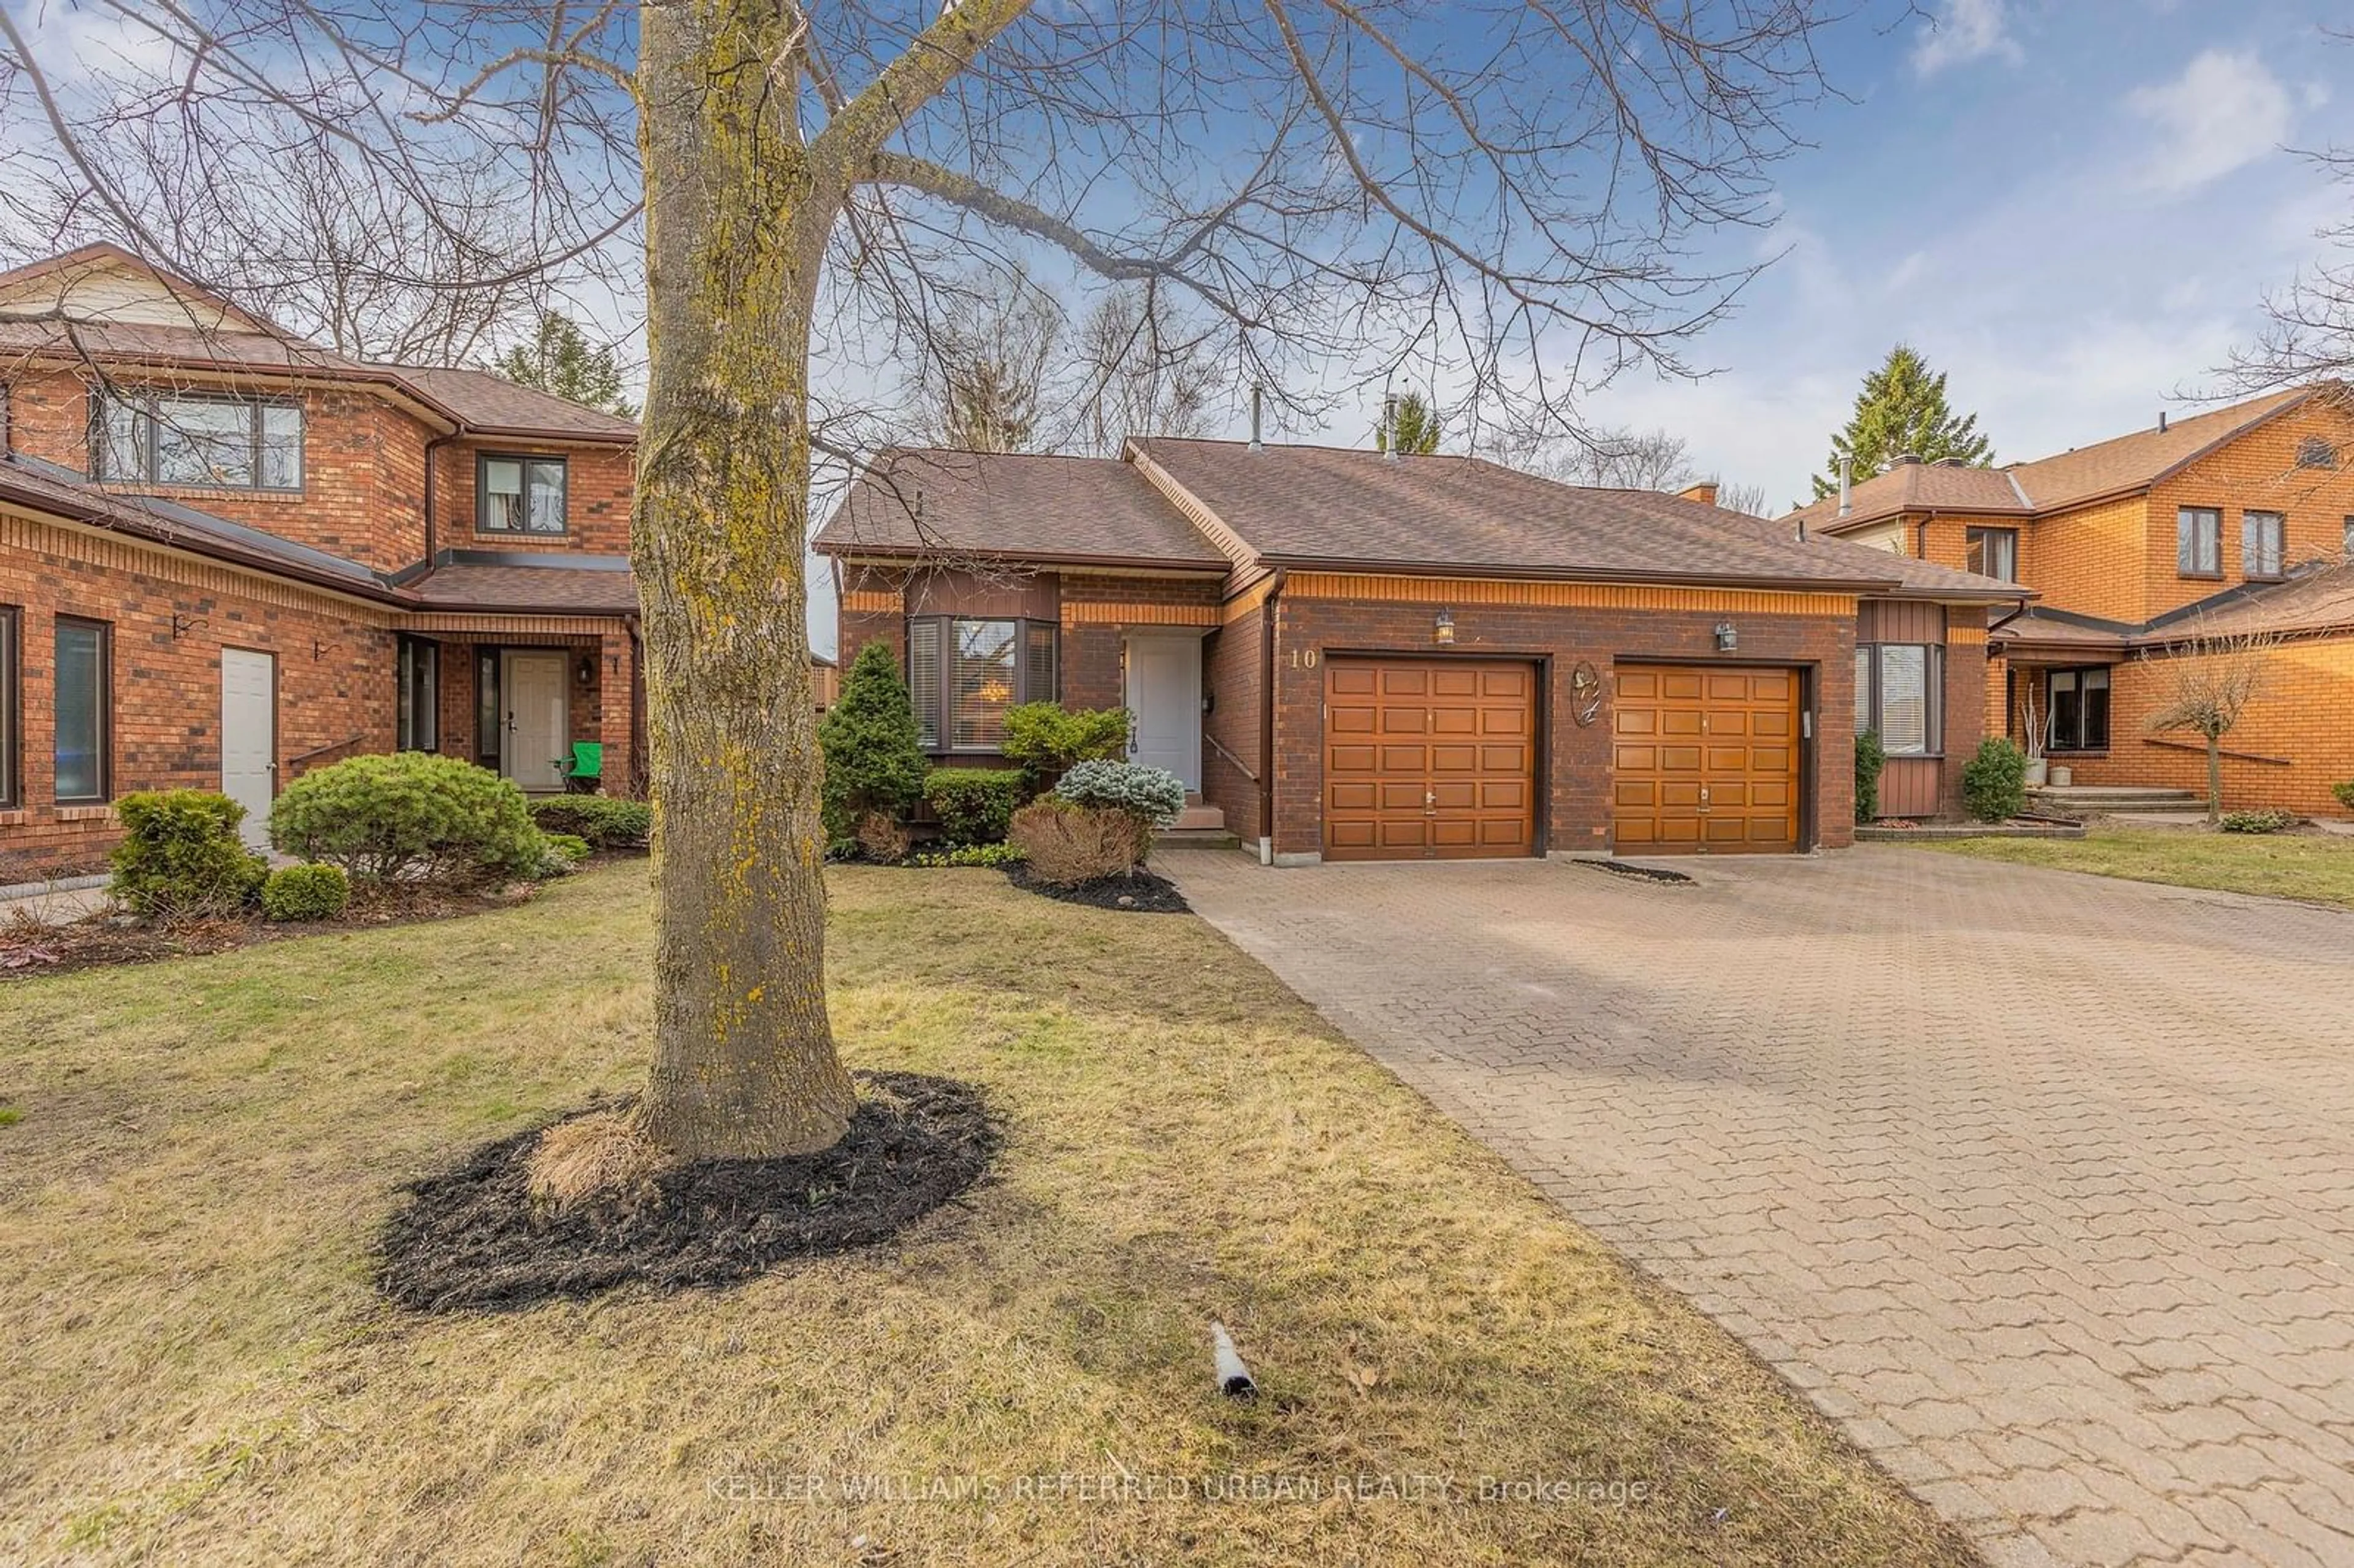 Home with brick exterior material for 10 Tanglewood Tr #31, New Tecumseth Ontario L9R 1S1